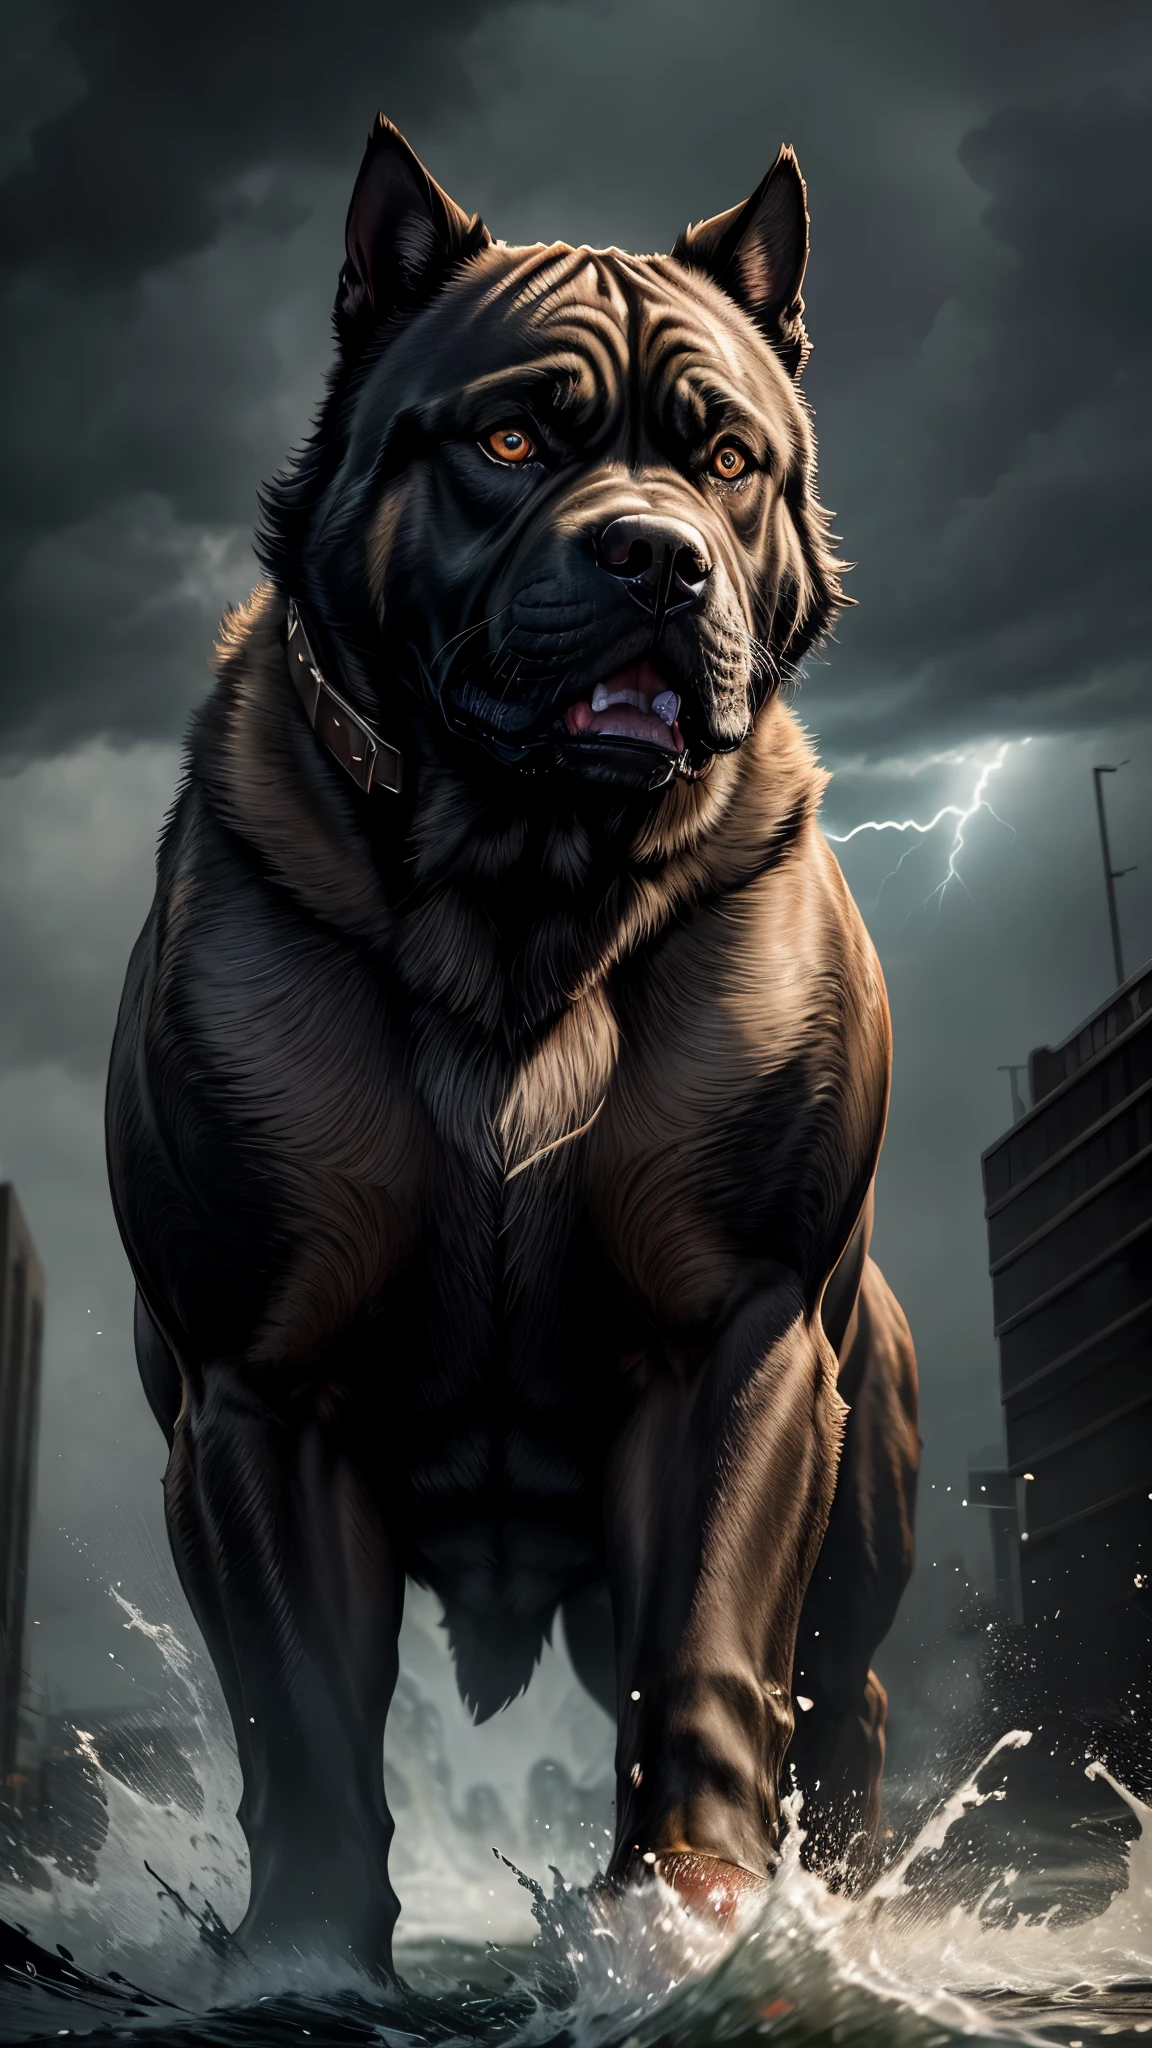 A fiercely snarling Cane Corso, its fur bristling with aggression, lightning crackling in the stormy background. This striking image captures the raw power and intensity of the canine in a photograph. The pitbull's fiery gaze and bared teeth convey a sense of danger and ferocity, while the dramatic setting adds an ominous atmosphere. The details are crisp and vivid, showcasing the quality of the composition and the artistry behind it. Viewer's attention is drawn to the dynamic contrast between the dog's menacing demeanor and the tumultuous weather, creating a visually compelling scene.